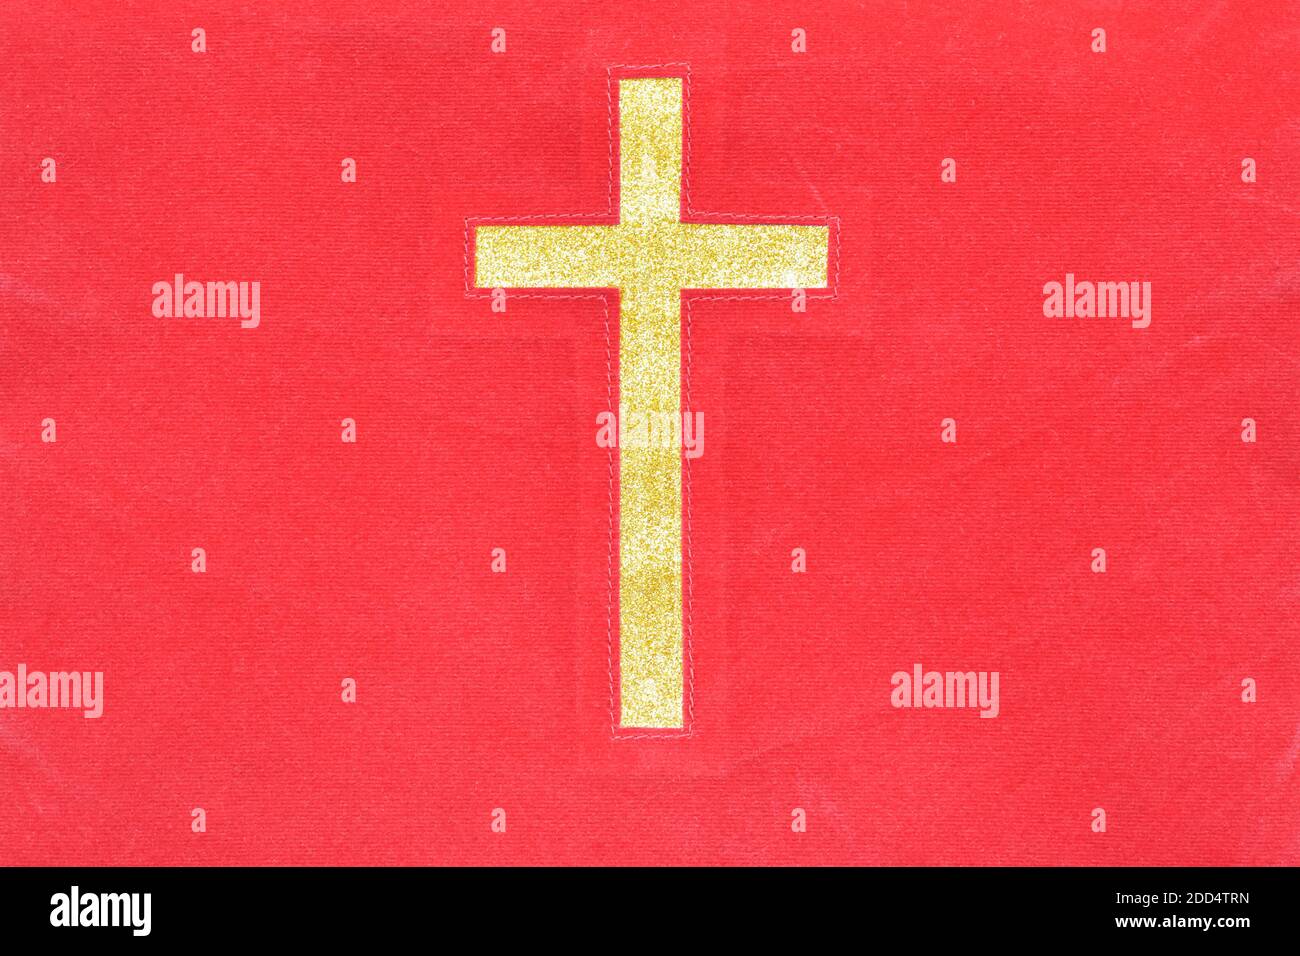 Gold catholic cross on red cloth texture background. Stock Photo